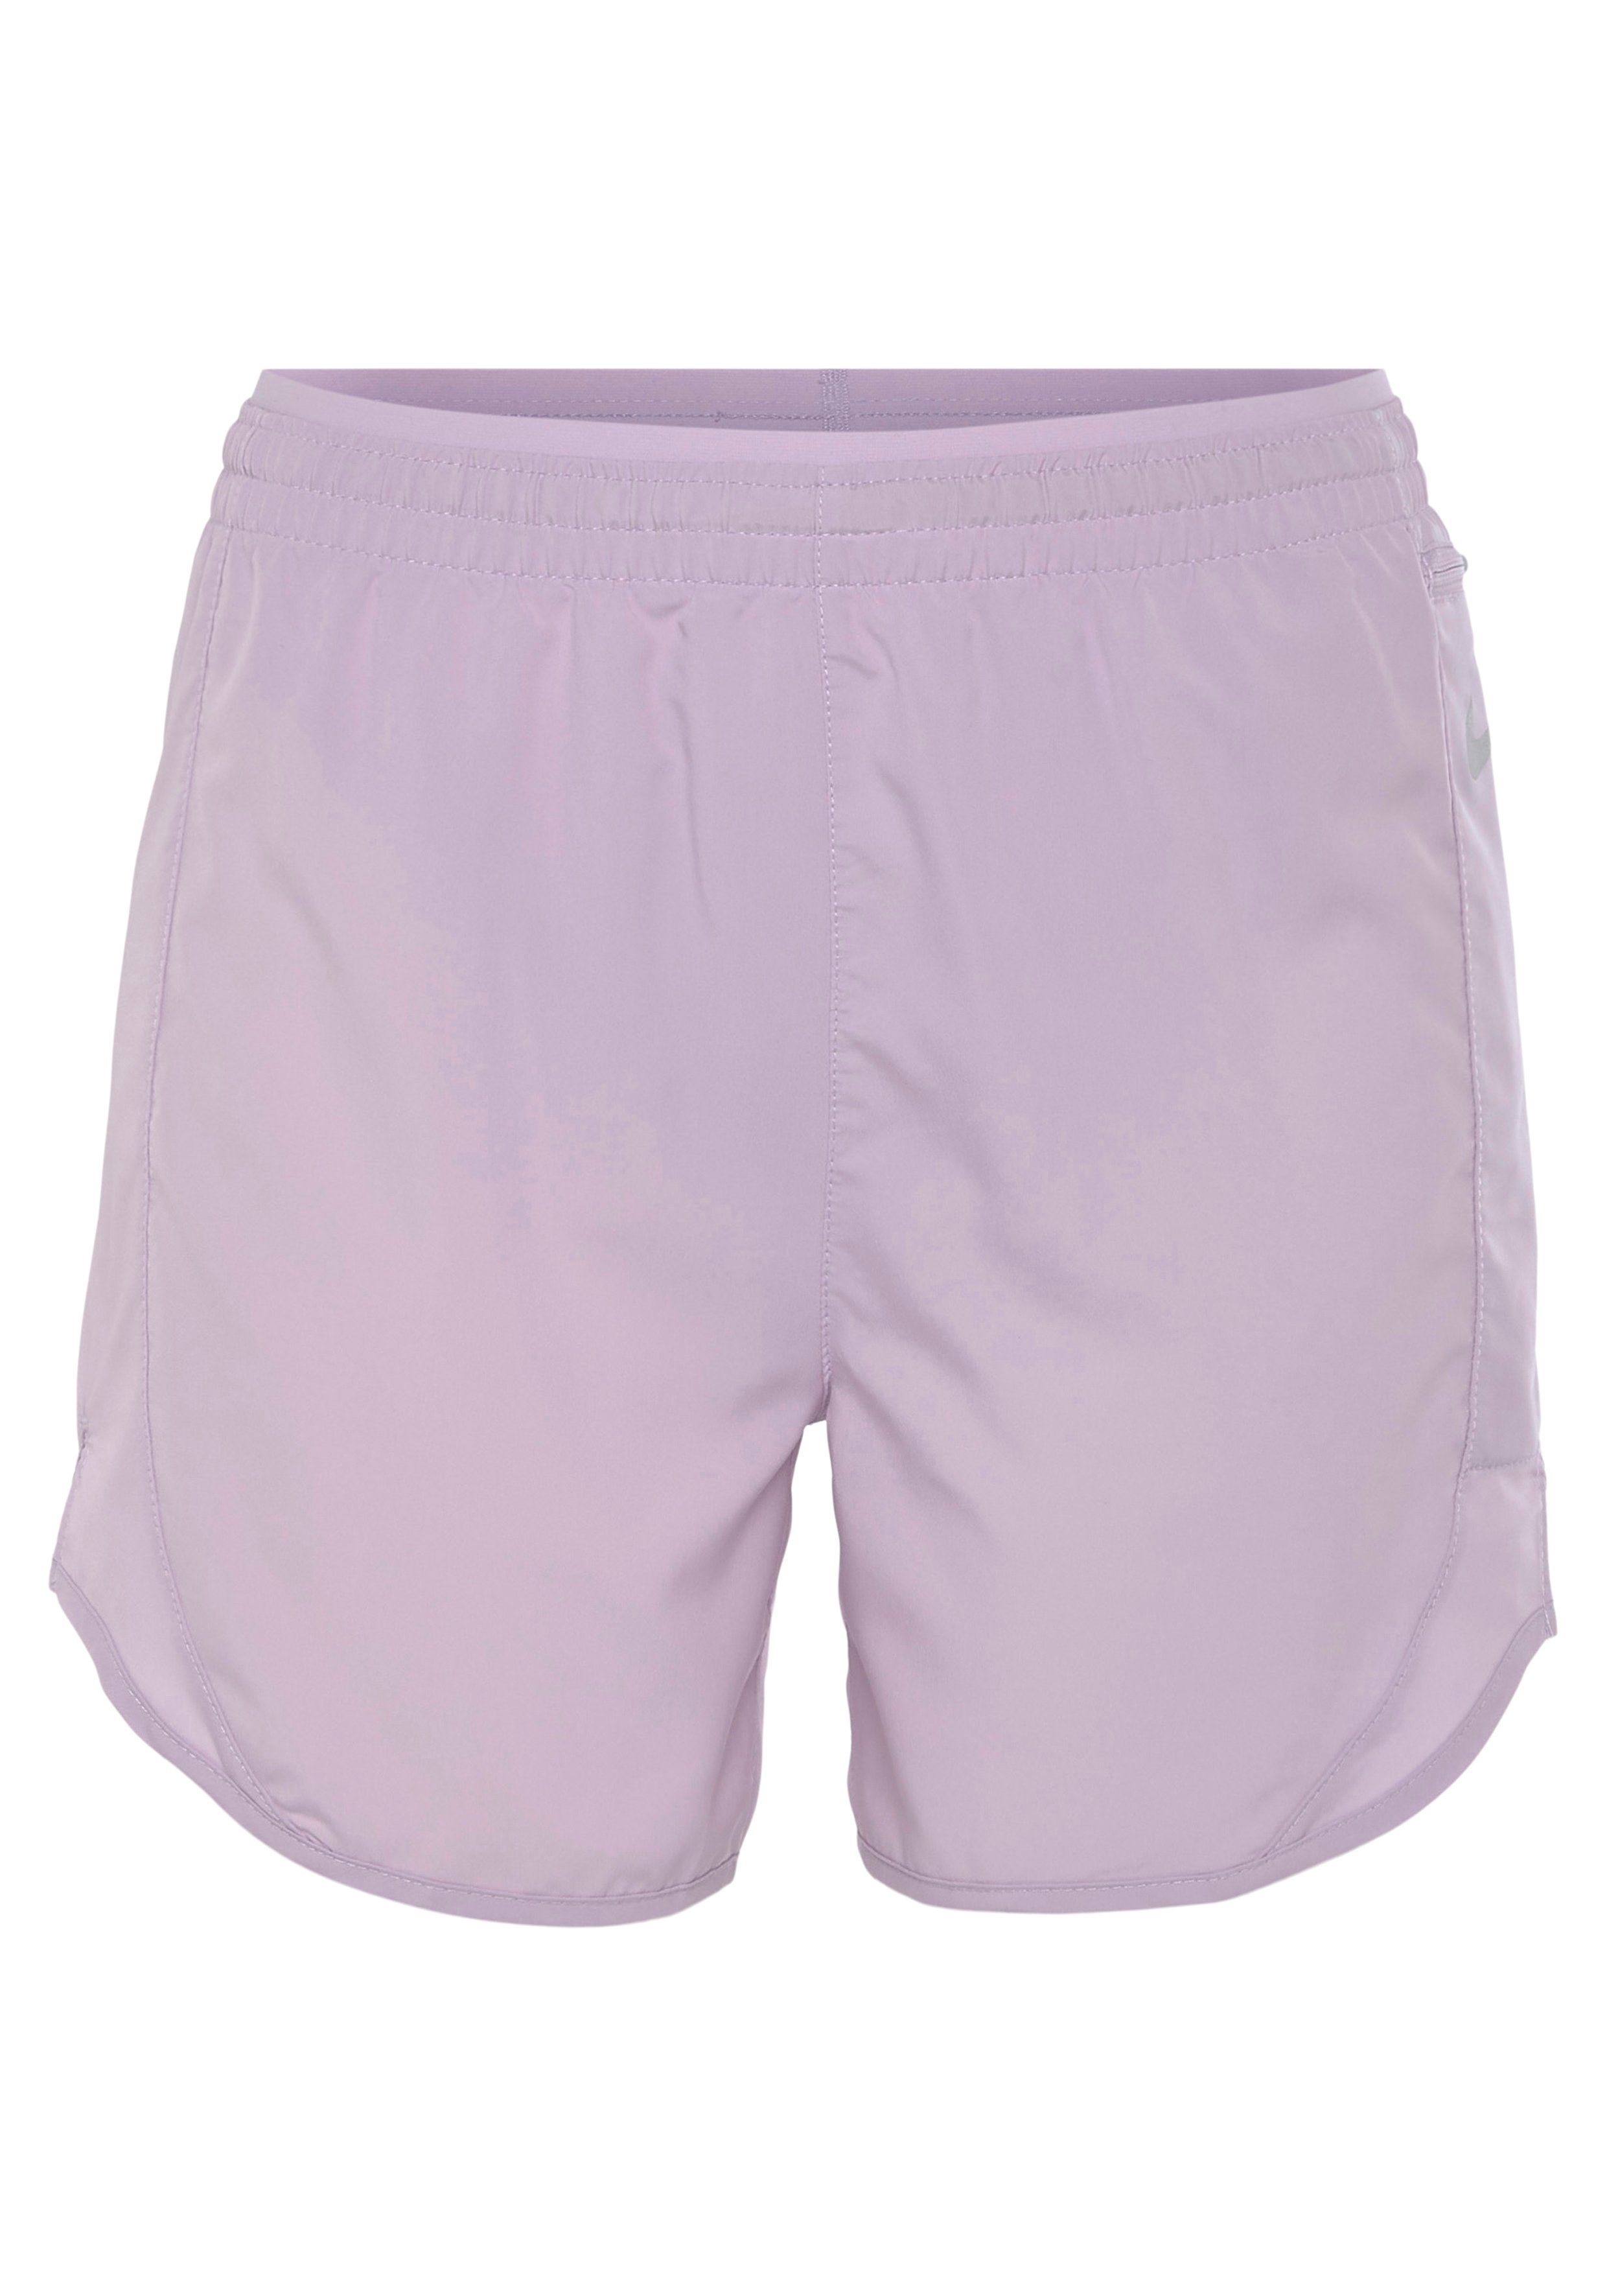 Women's Shorts Laufshorts DOLL/DOLL/REFLECTIVE Nike SILV Tempo Luxe Running